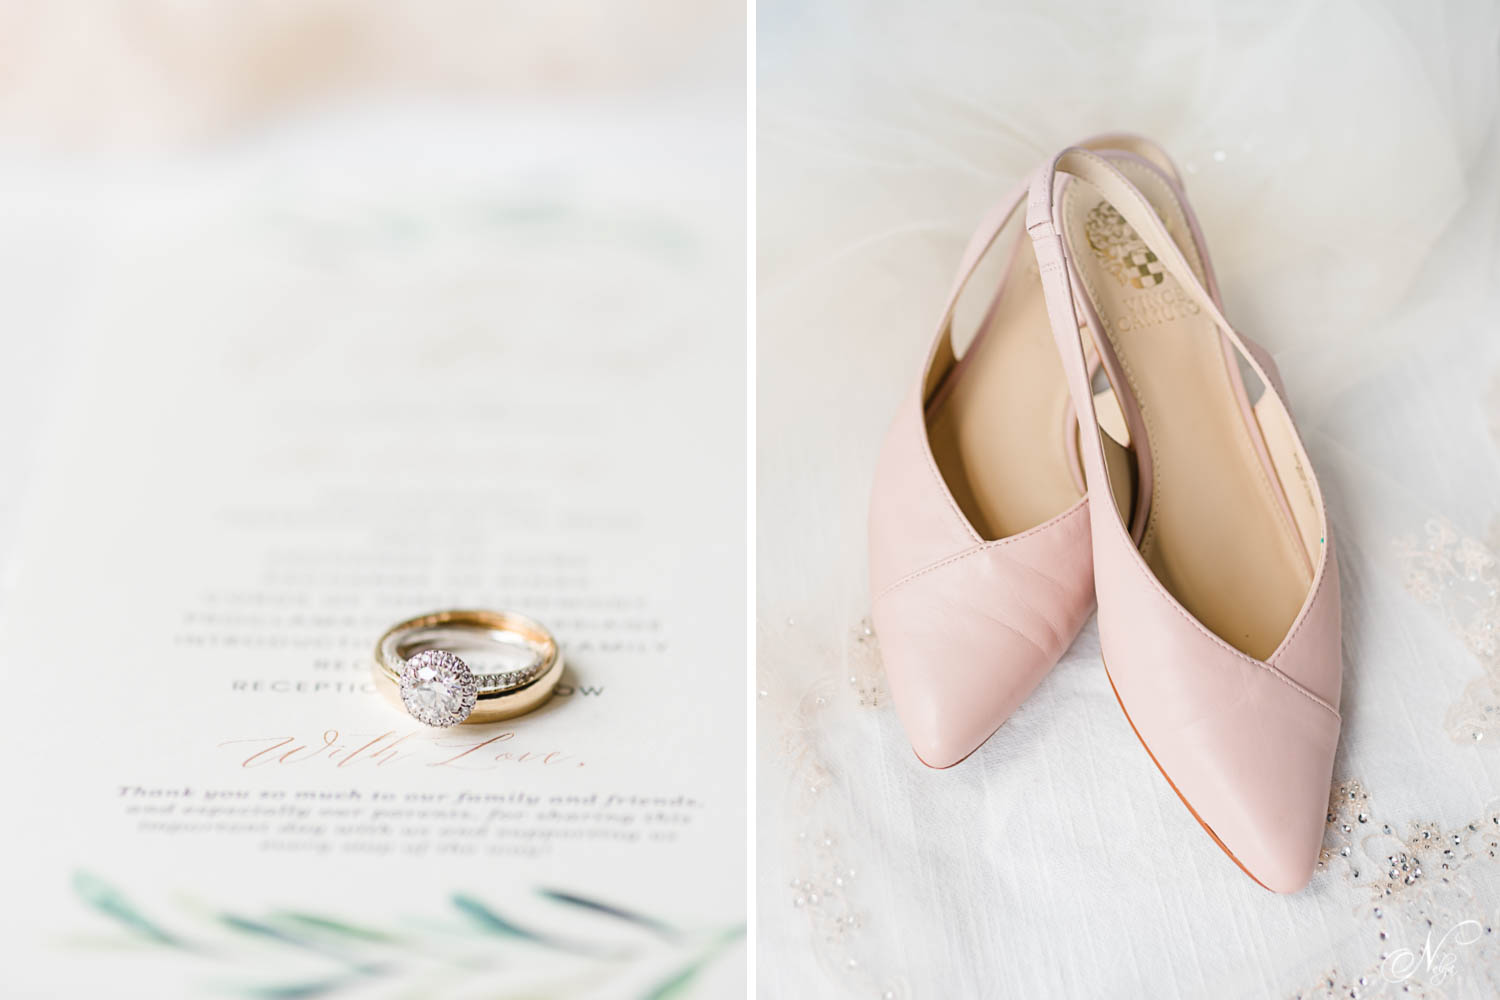 wedding rings sitting on invitation with gold script writing. and pink leather Vince Camuto slippers